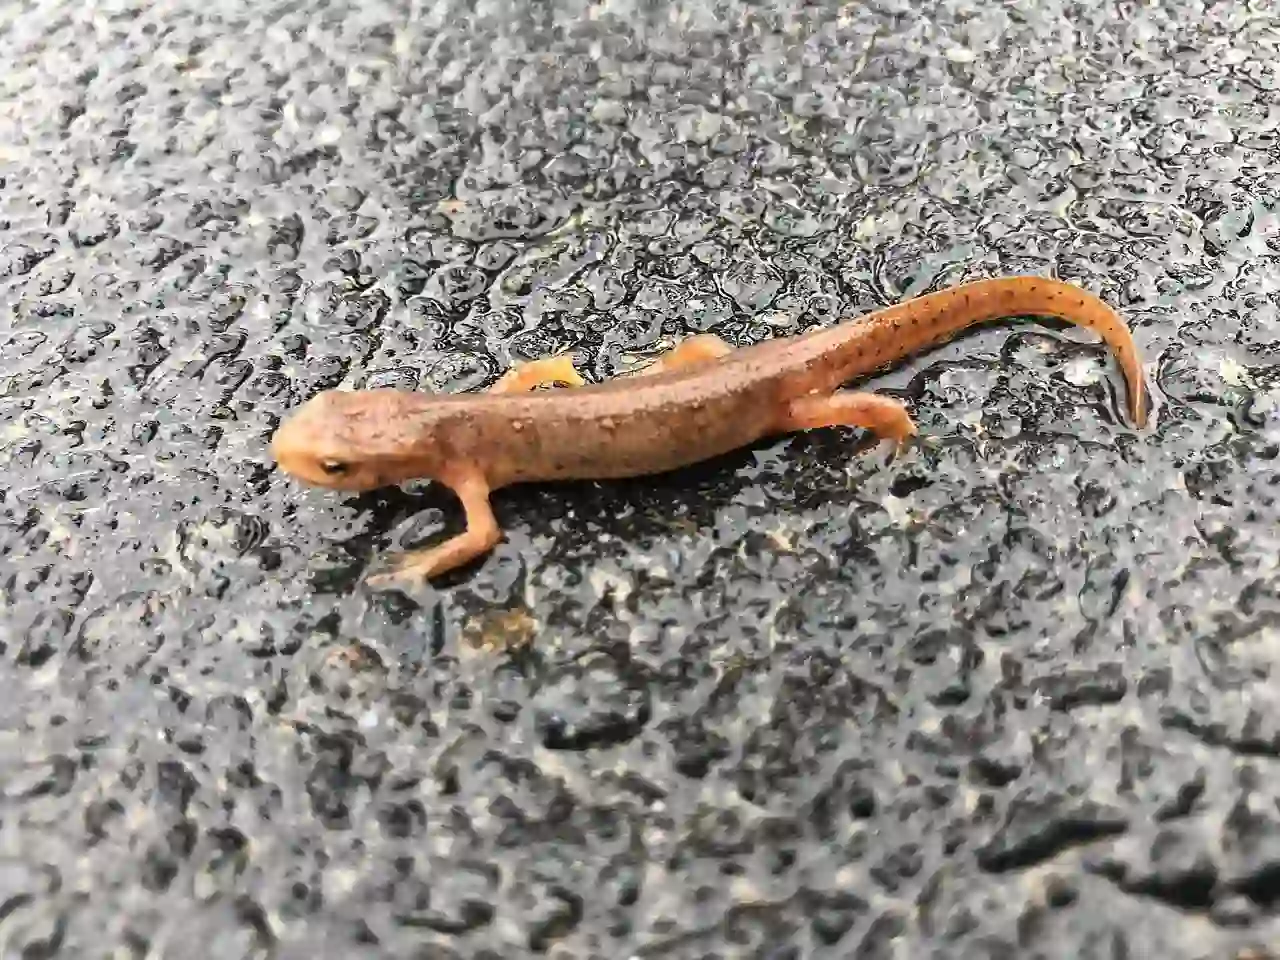 Orange Newt. What is the different between a salamander and a newt?